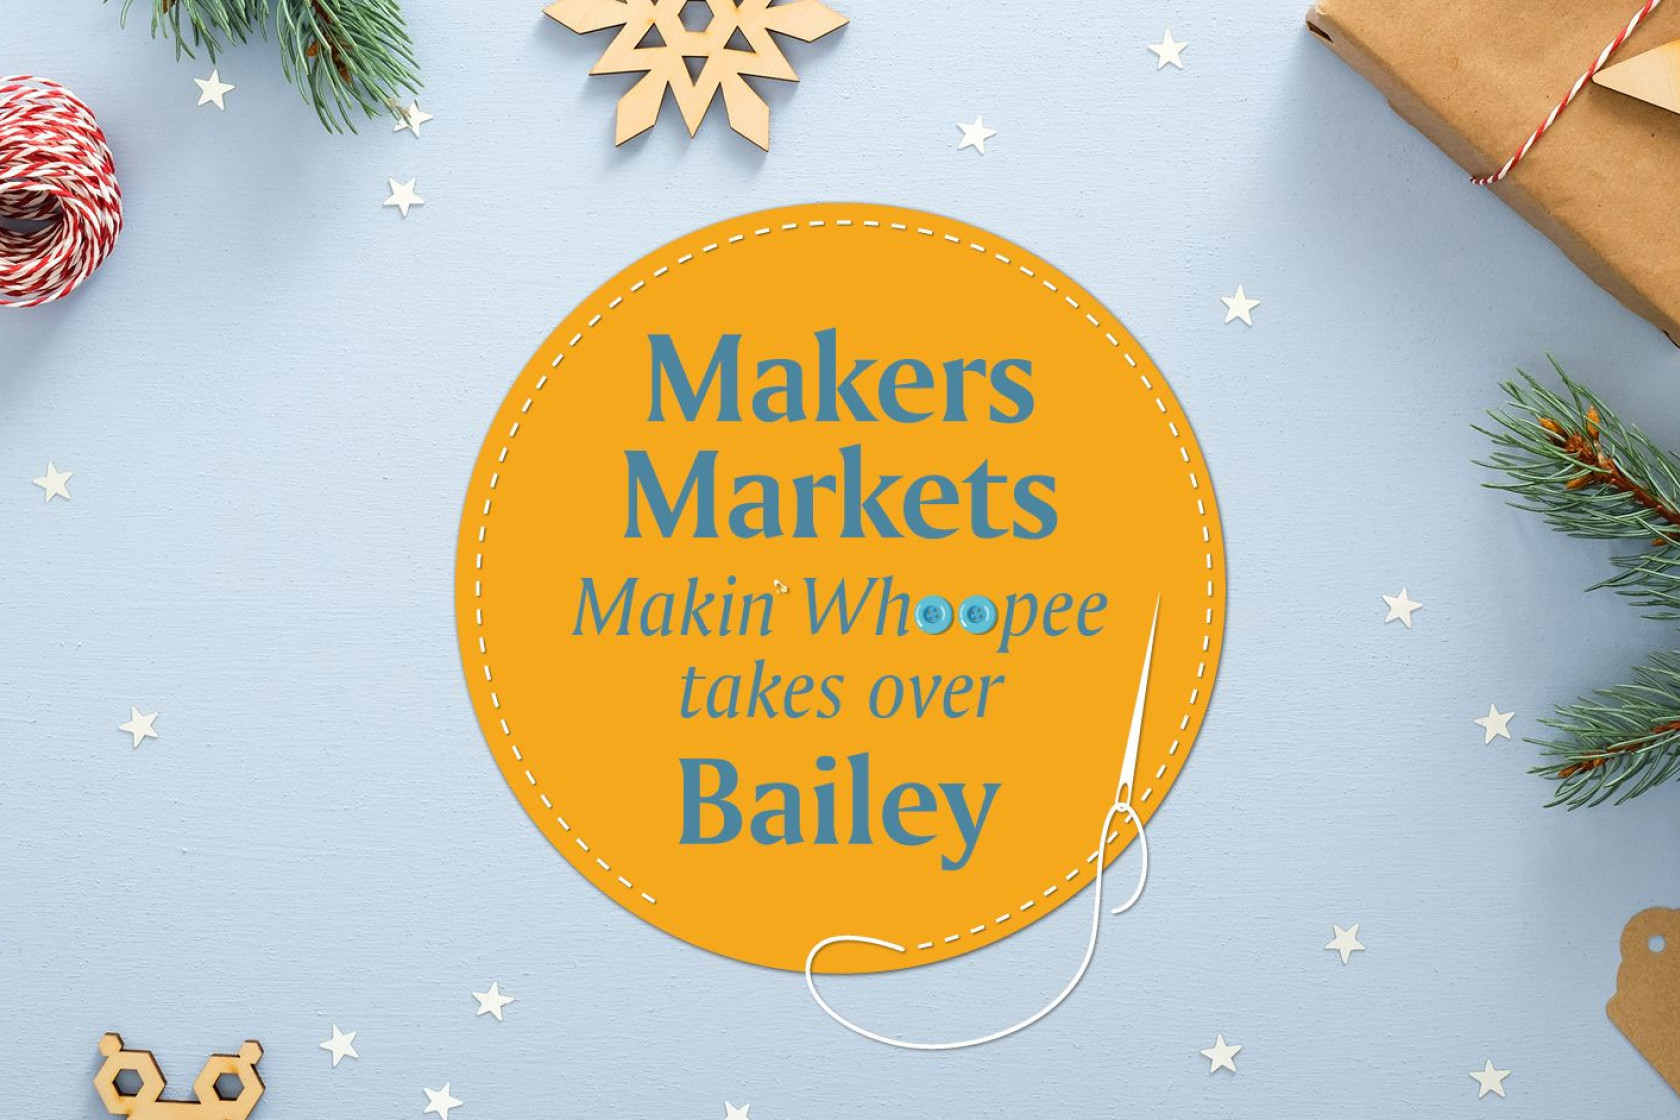 Makin' Whoopee Brings Its Makers' Markets to Bailey - feature photo